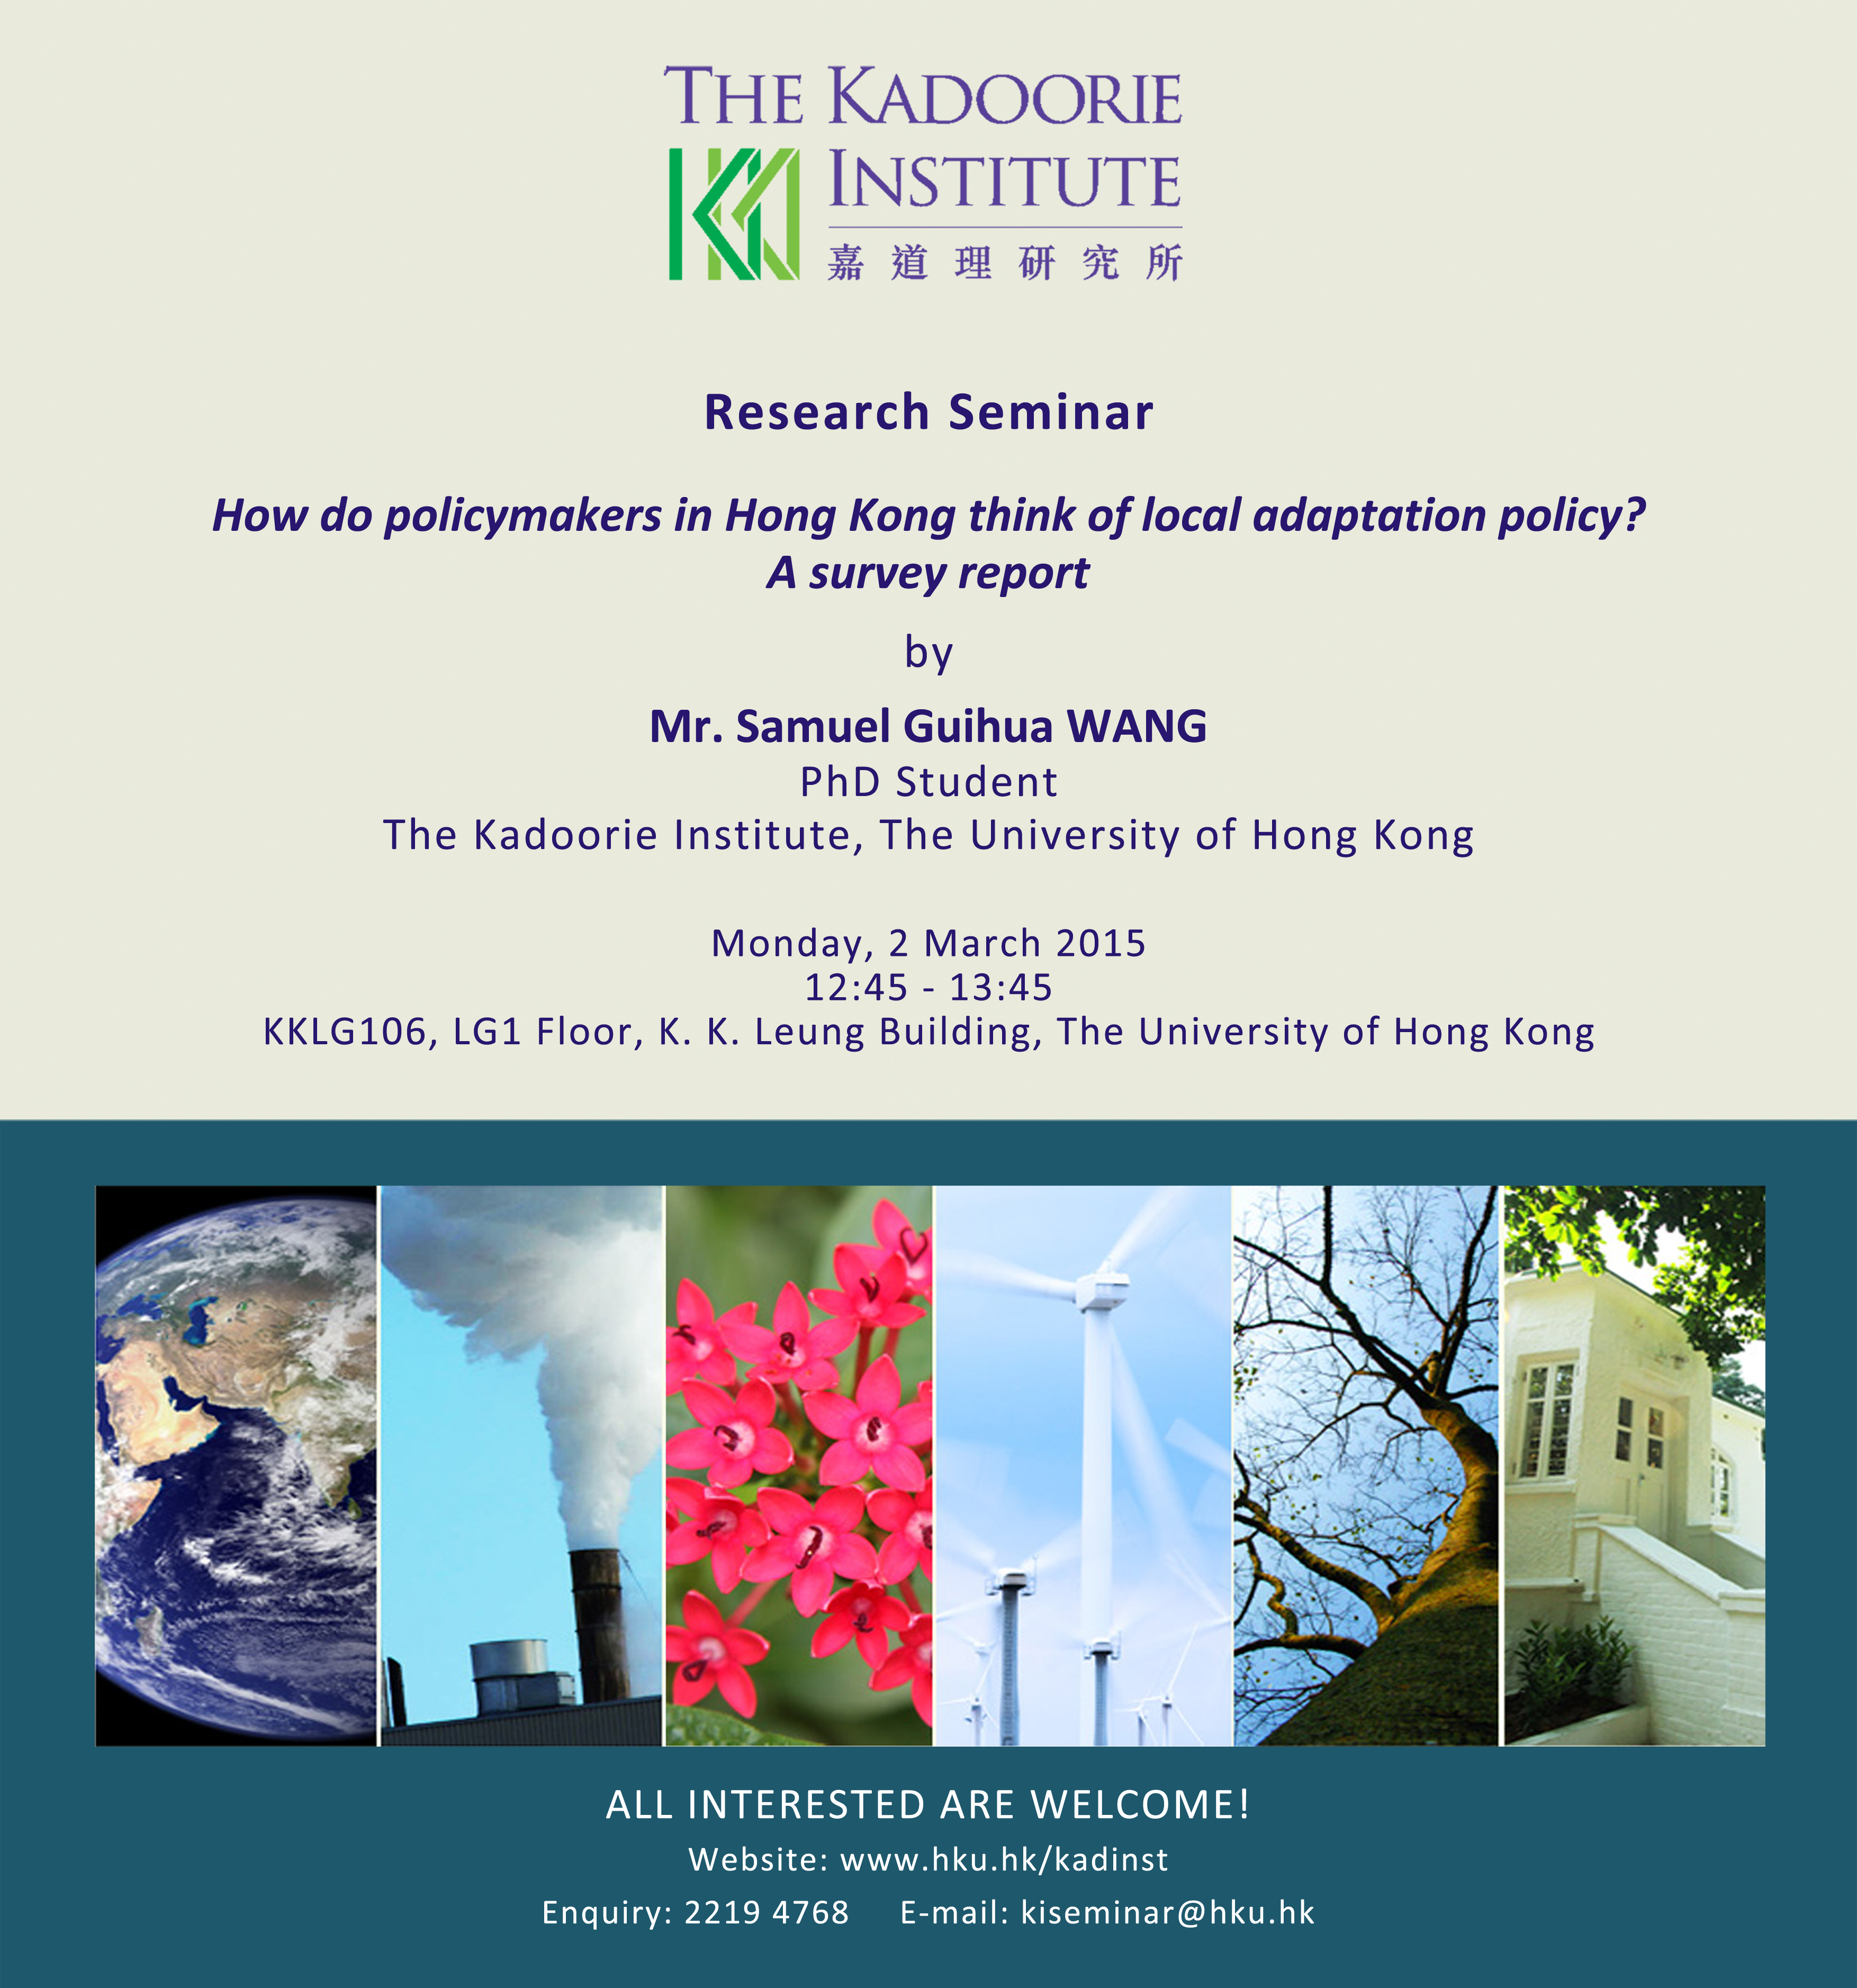 Research Seminar on How do policymakers in Hong Kong think of local adaptation policy?  - The Kadoorie Institute